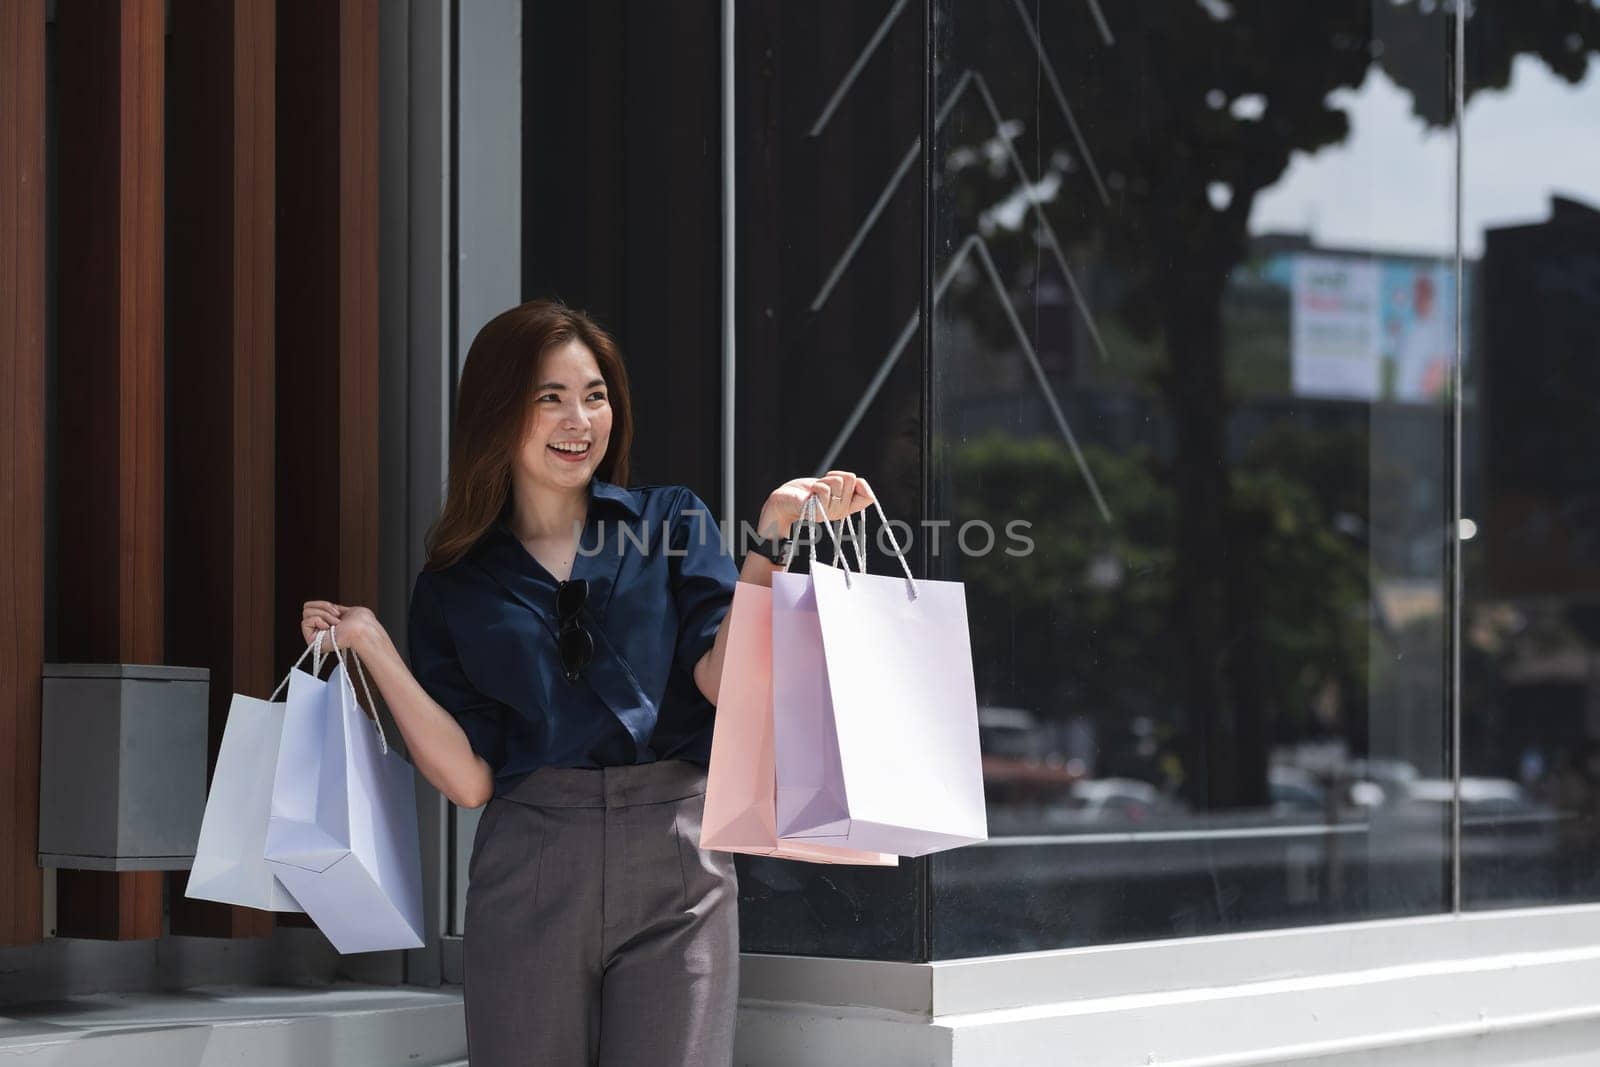 A woman is holding two shopping bags and smiling.